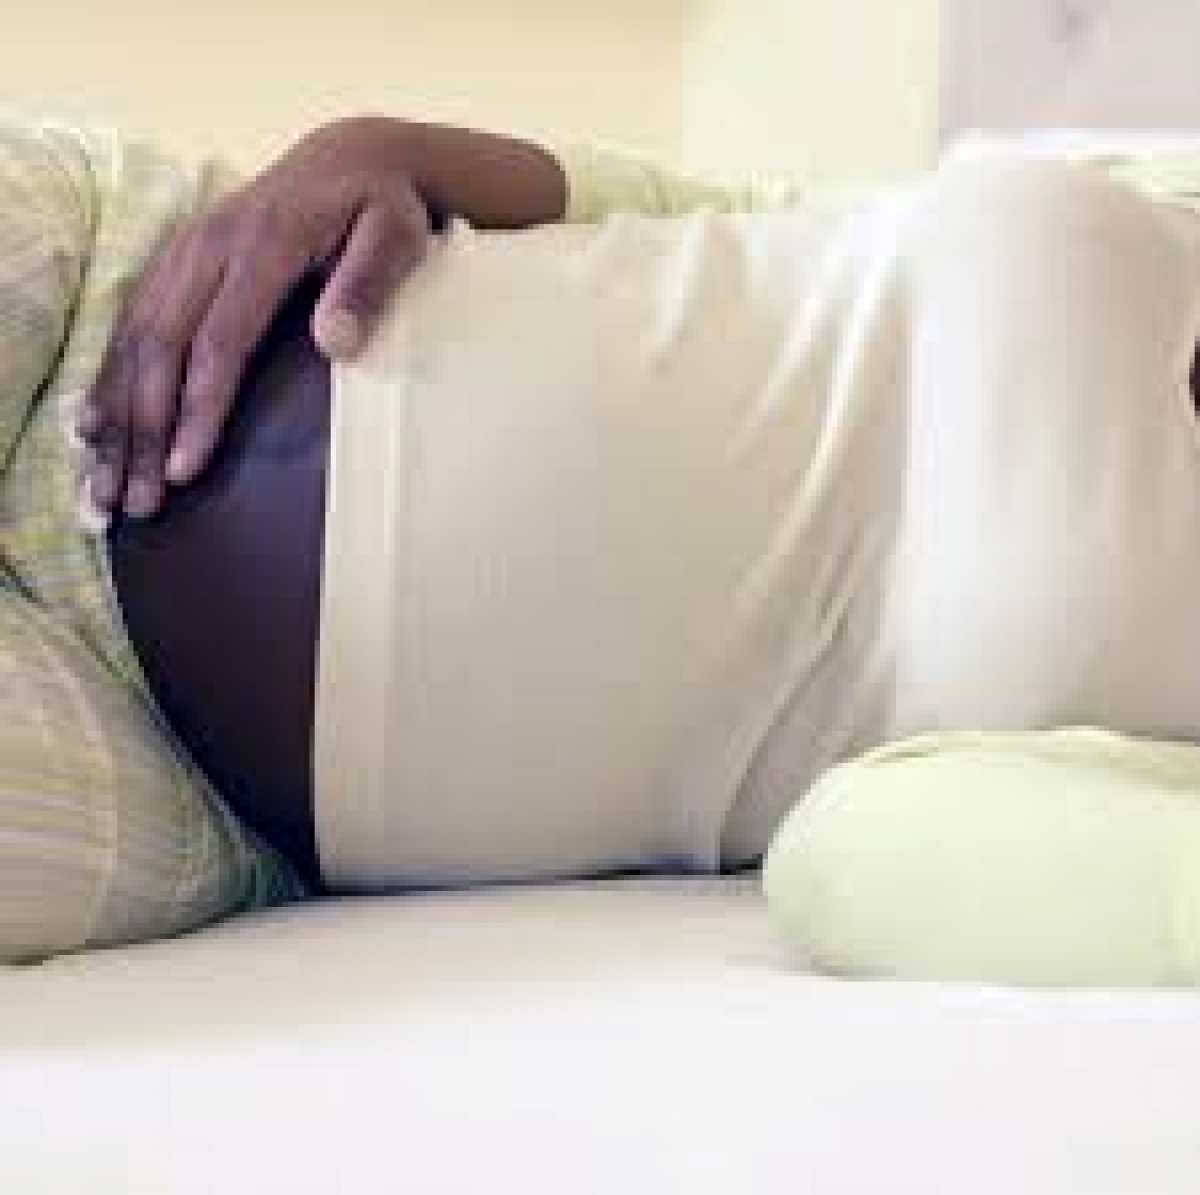 Pregnant women sleeping in poorly ventilated rooms at risk of premature labour, stillbirth —Gynaecologists